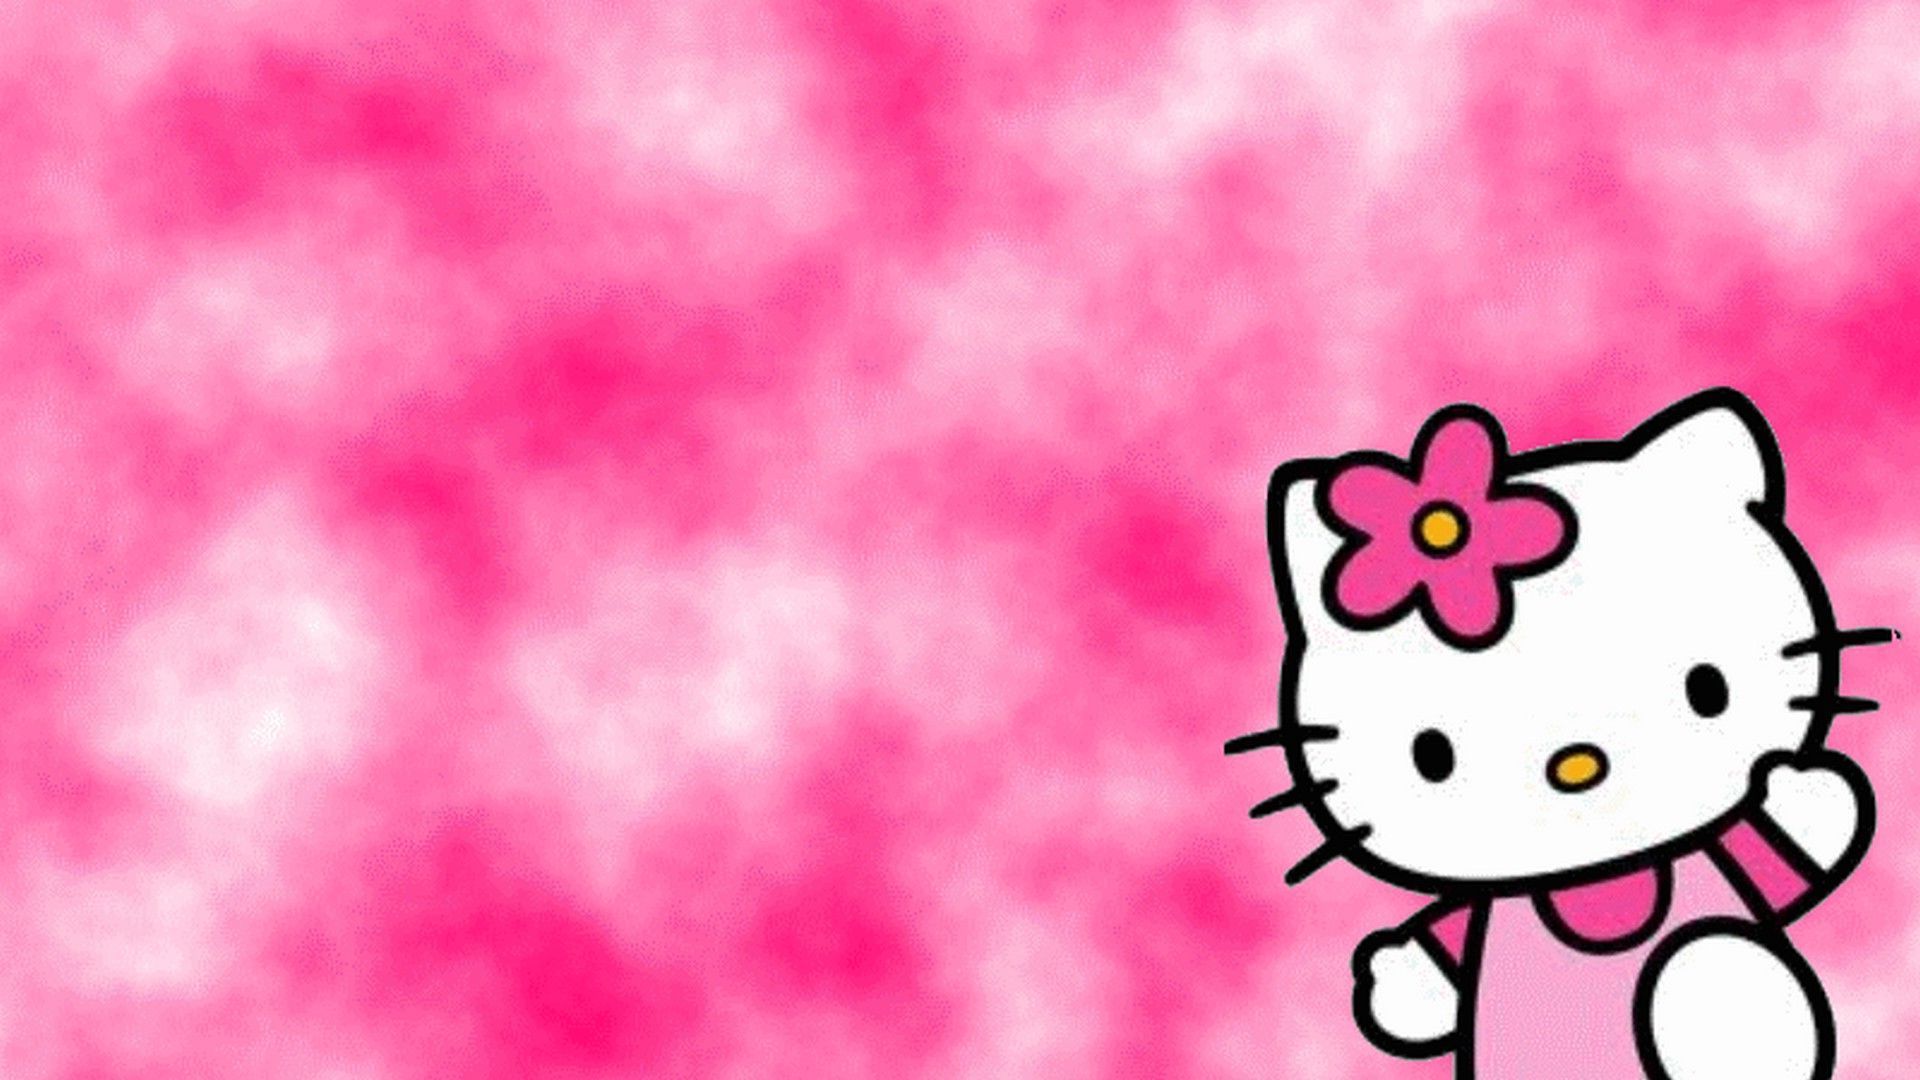 Hello Kitty Wallpaper for mobile phone, tablet, desktop computer and other devices HD an. Hello kitty wallpaper hd, Hello kitty background, Hello kitty wallpaper